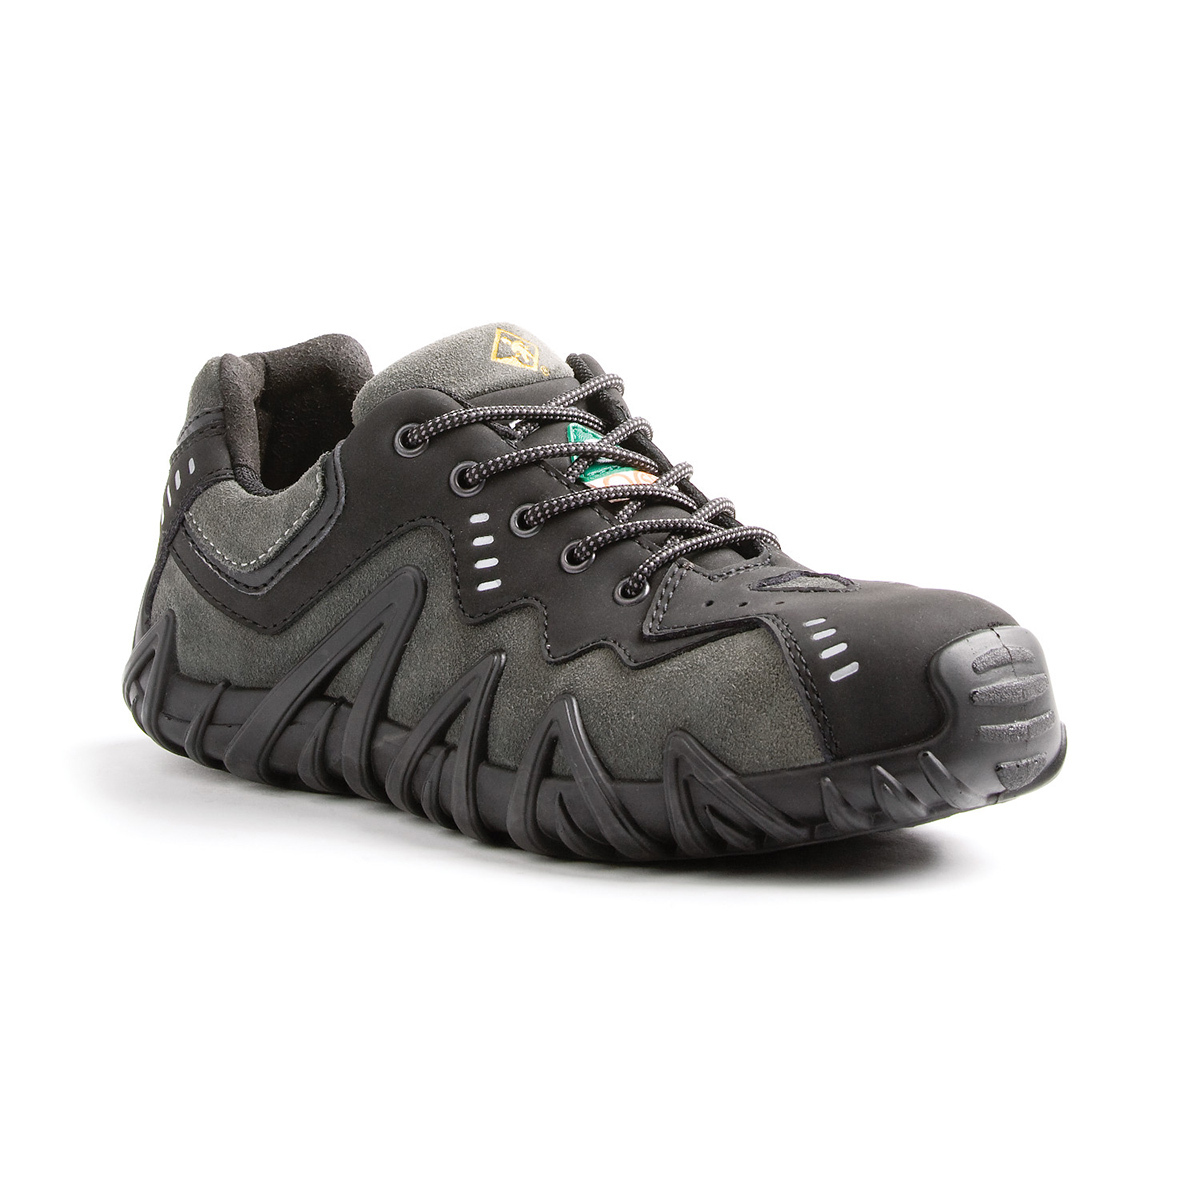 TERRA Size 9 Black Spider Suede Leather Composite Toe Athletic Shoes With Direct Injected PU Midsole And Outsole